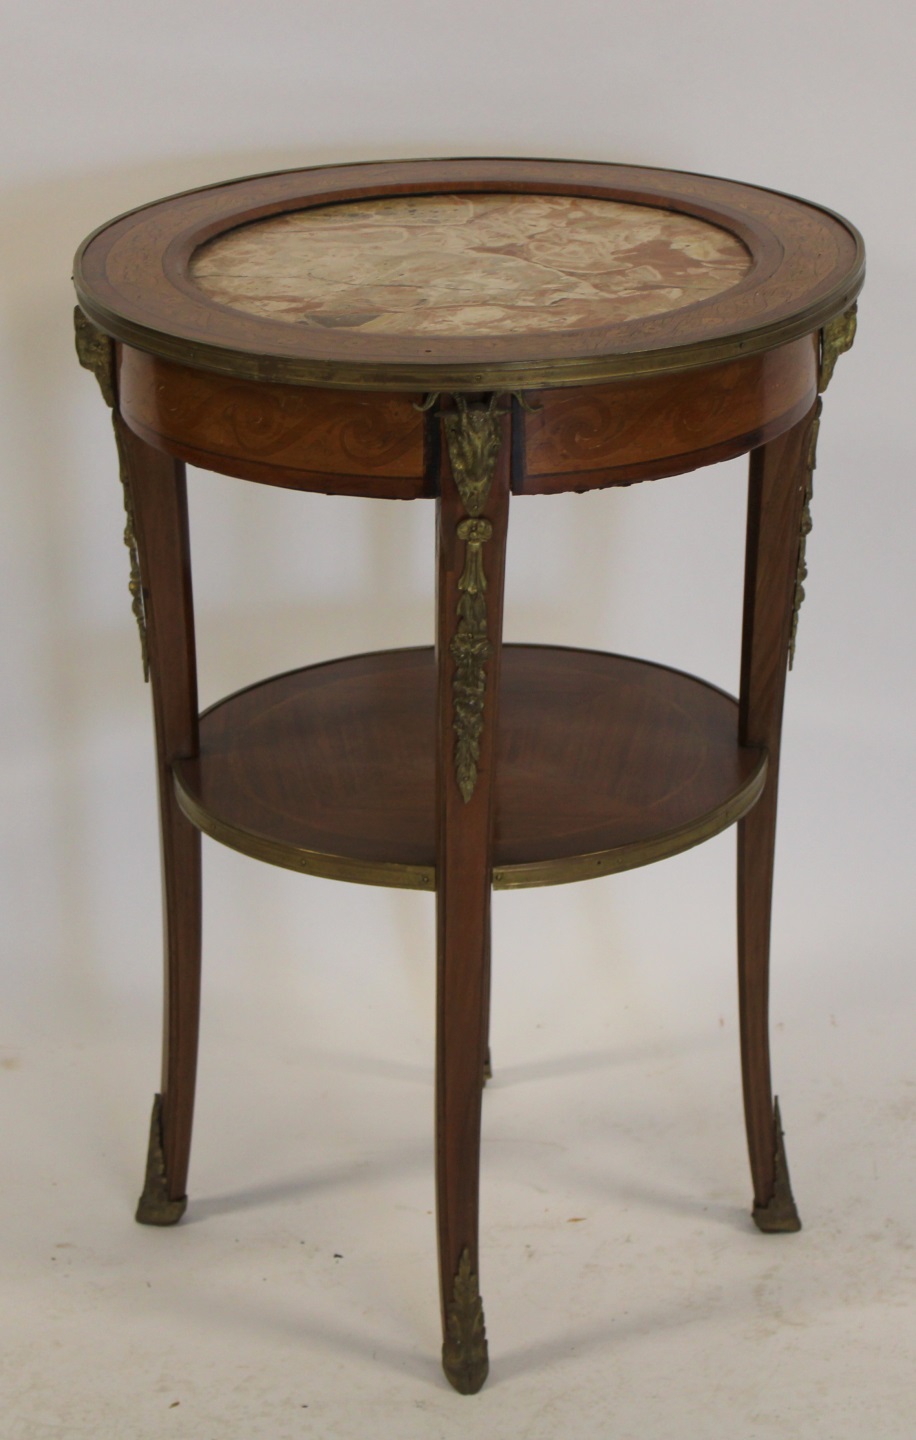 ANTIQUE BRONZE MOUNTED INLAID TABLE